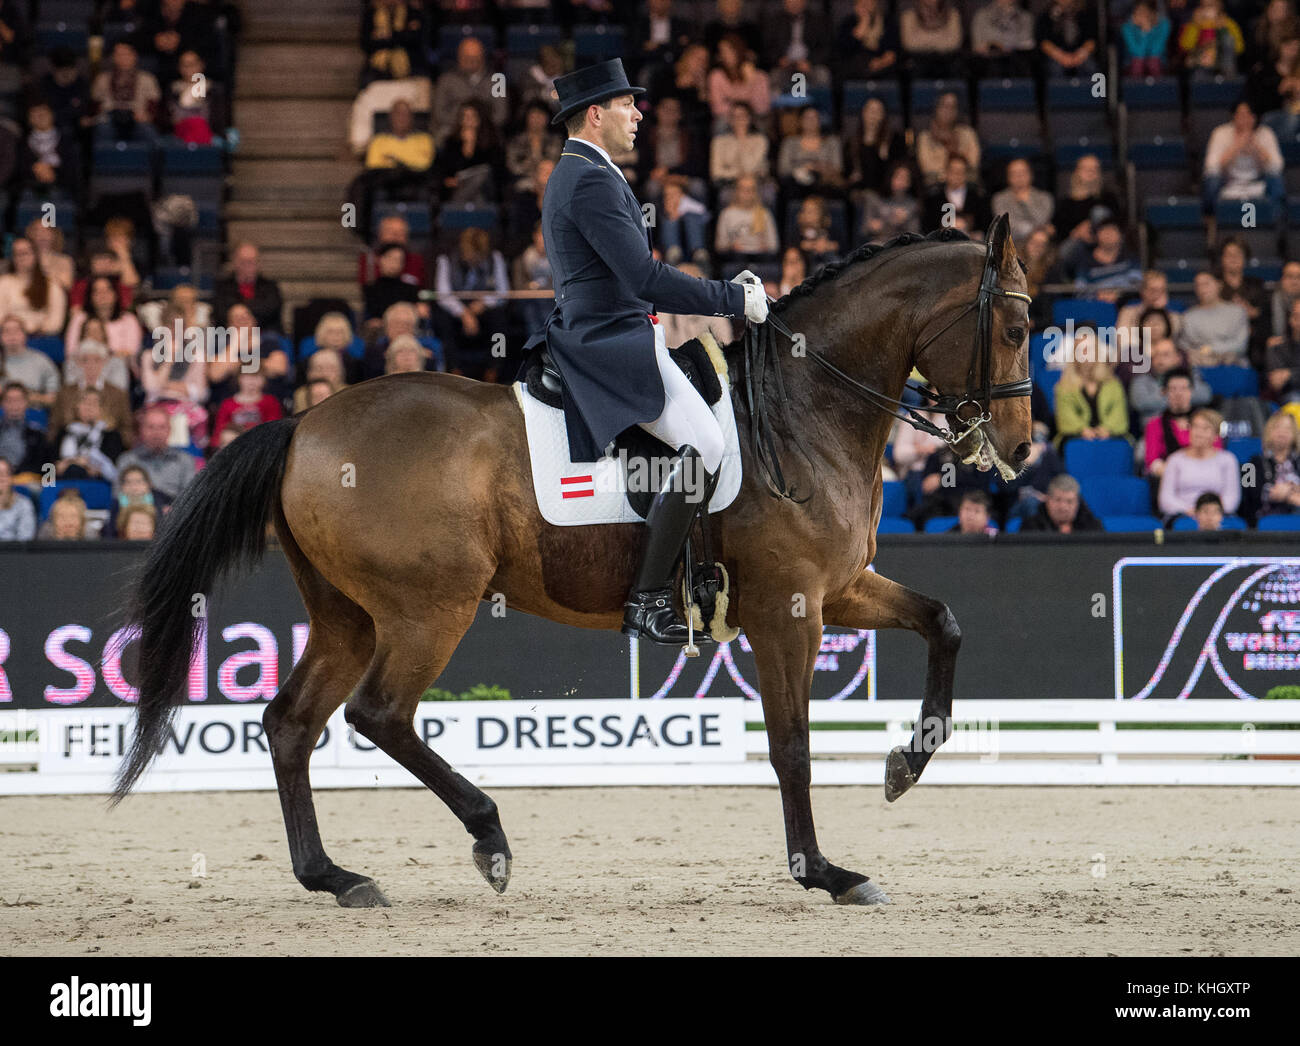 Stuttgart, Germany. 18th Nov, 2017. The Austrian dressage rider Christian Schumach riding his horse Auheim's Picardo during the 33rd horse show for the World Cup qualifications at the Schleyerhalle in Stuttgart, Germany, 18 November 2017. Schumach won 15th place. Credit: Sebastian Gollnow/dpa/Alamy Live News Stock Photo